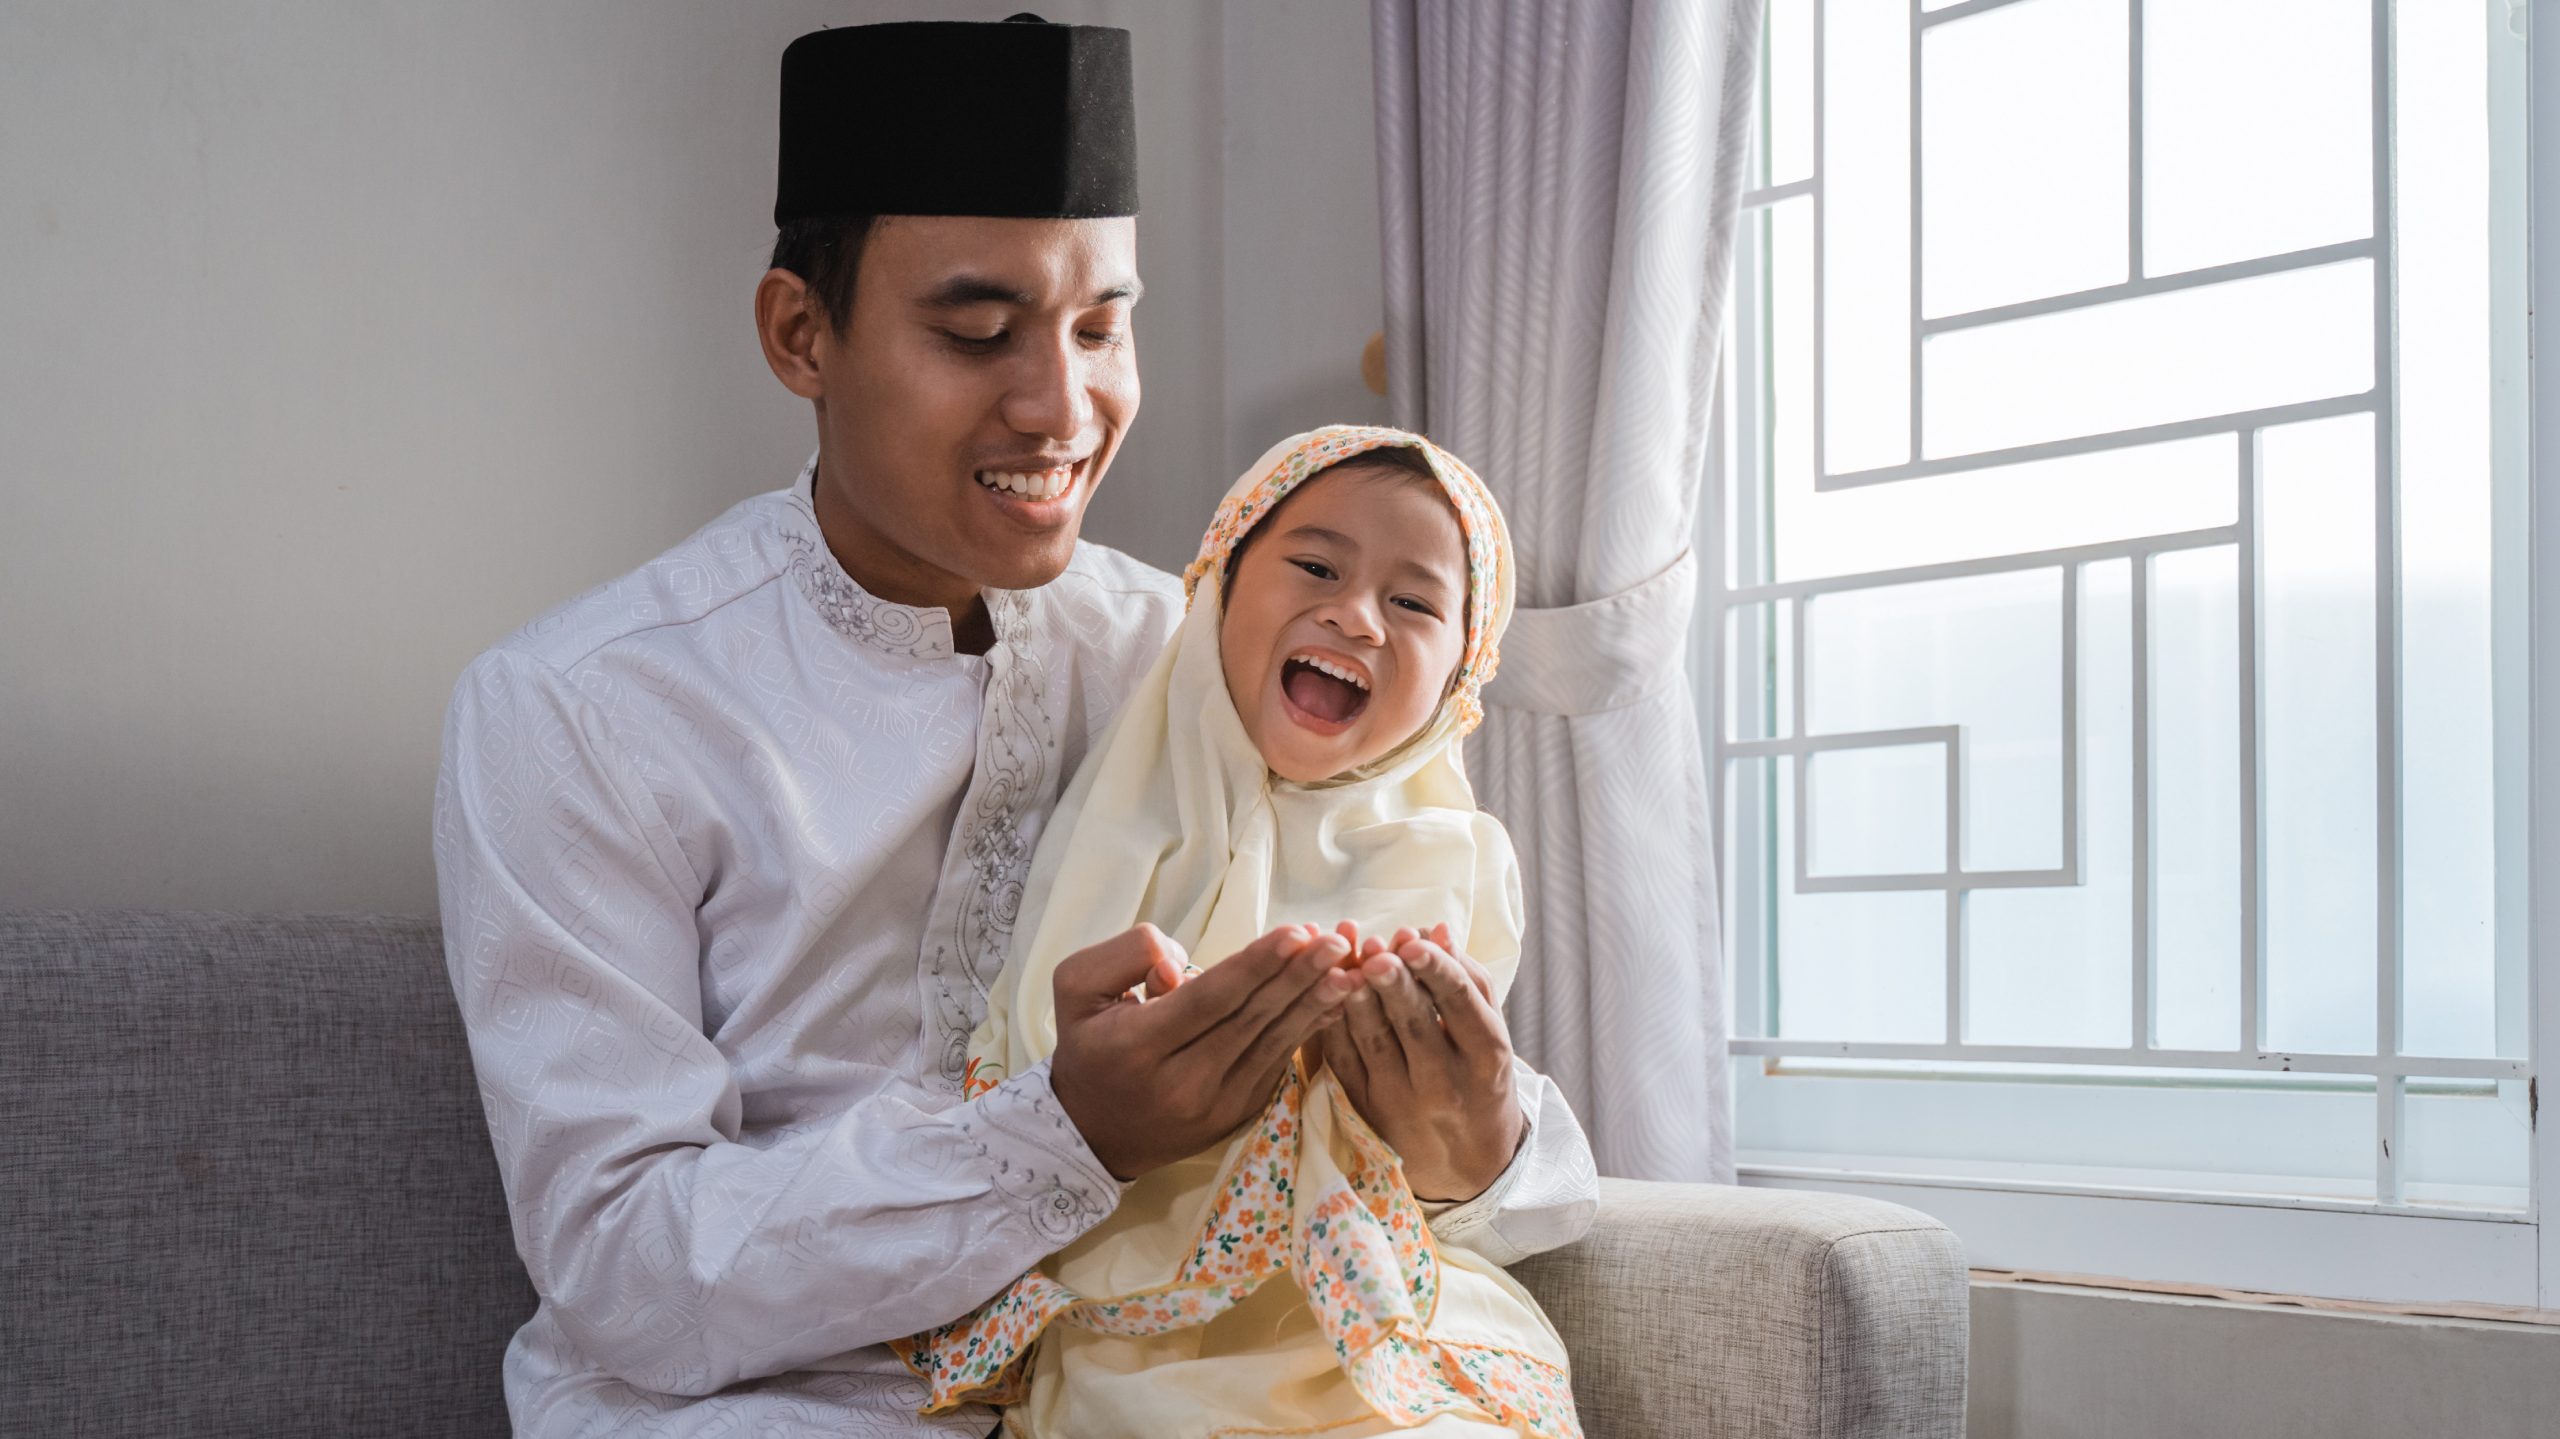 “HOW CAN I TEACH MY CHILD TO START FASTING? ARE THEY READY?”